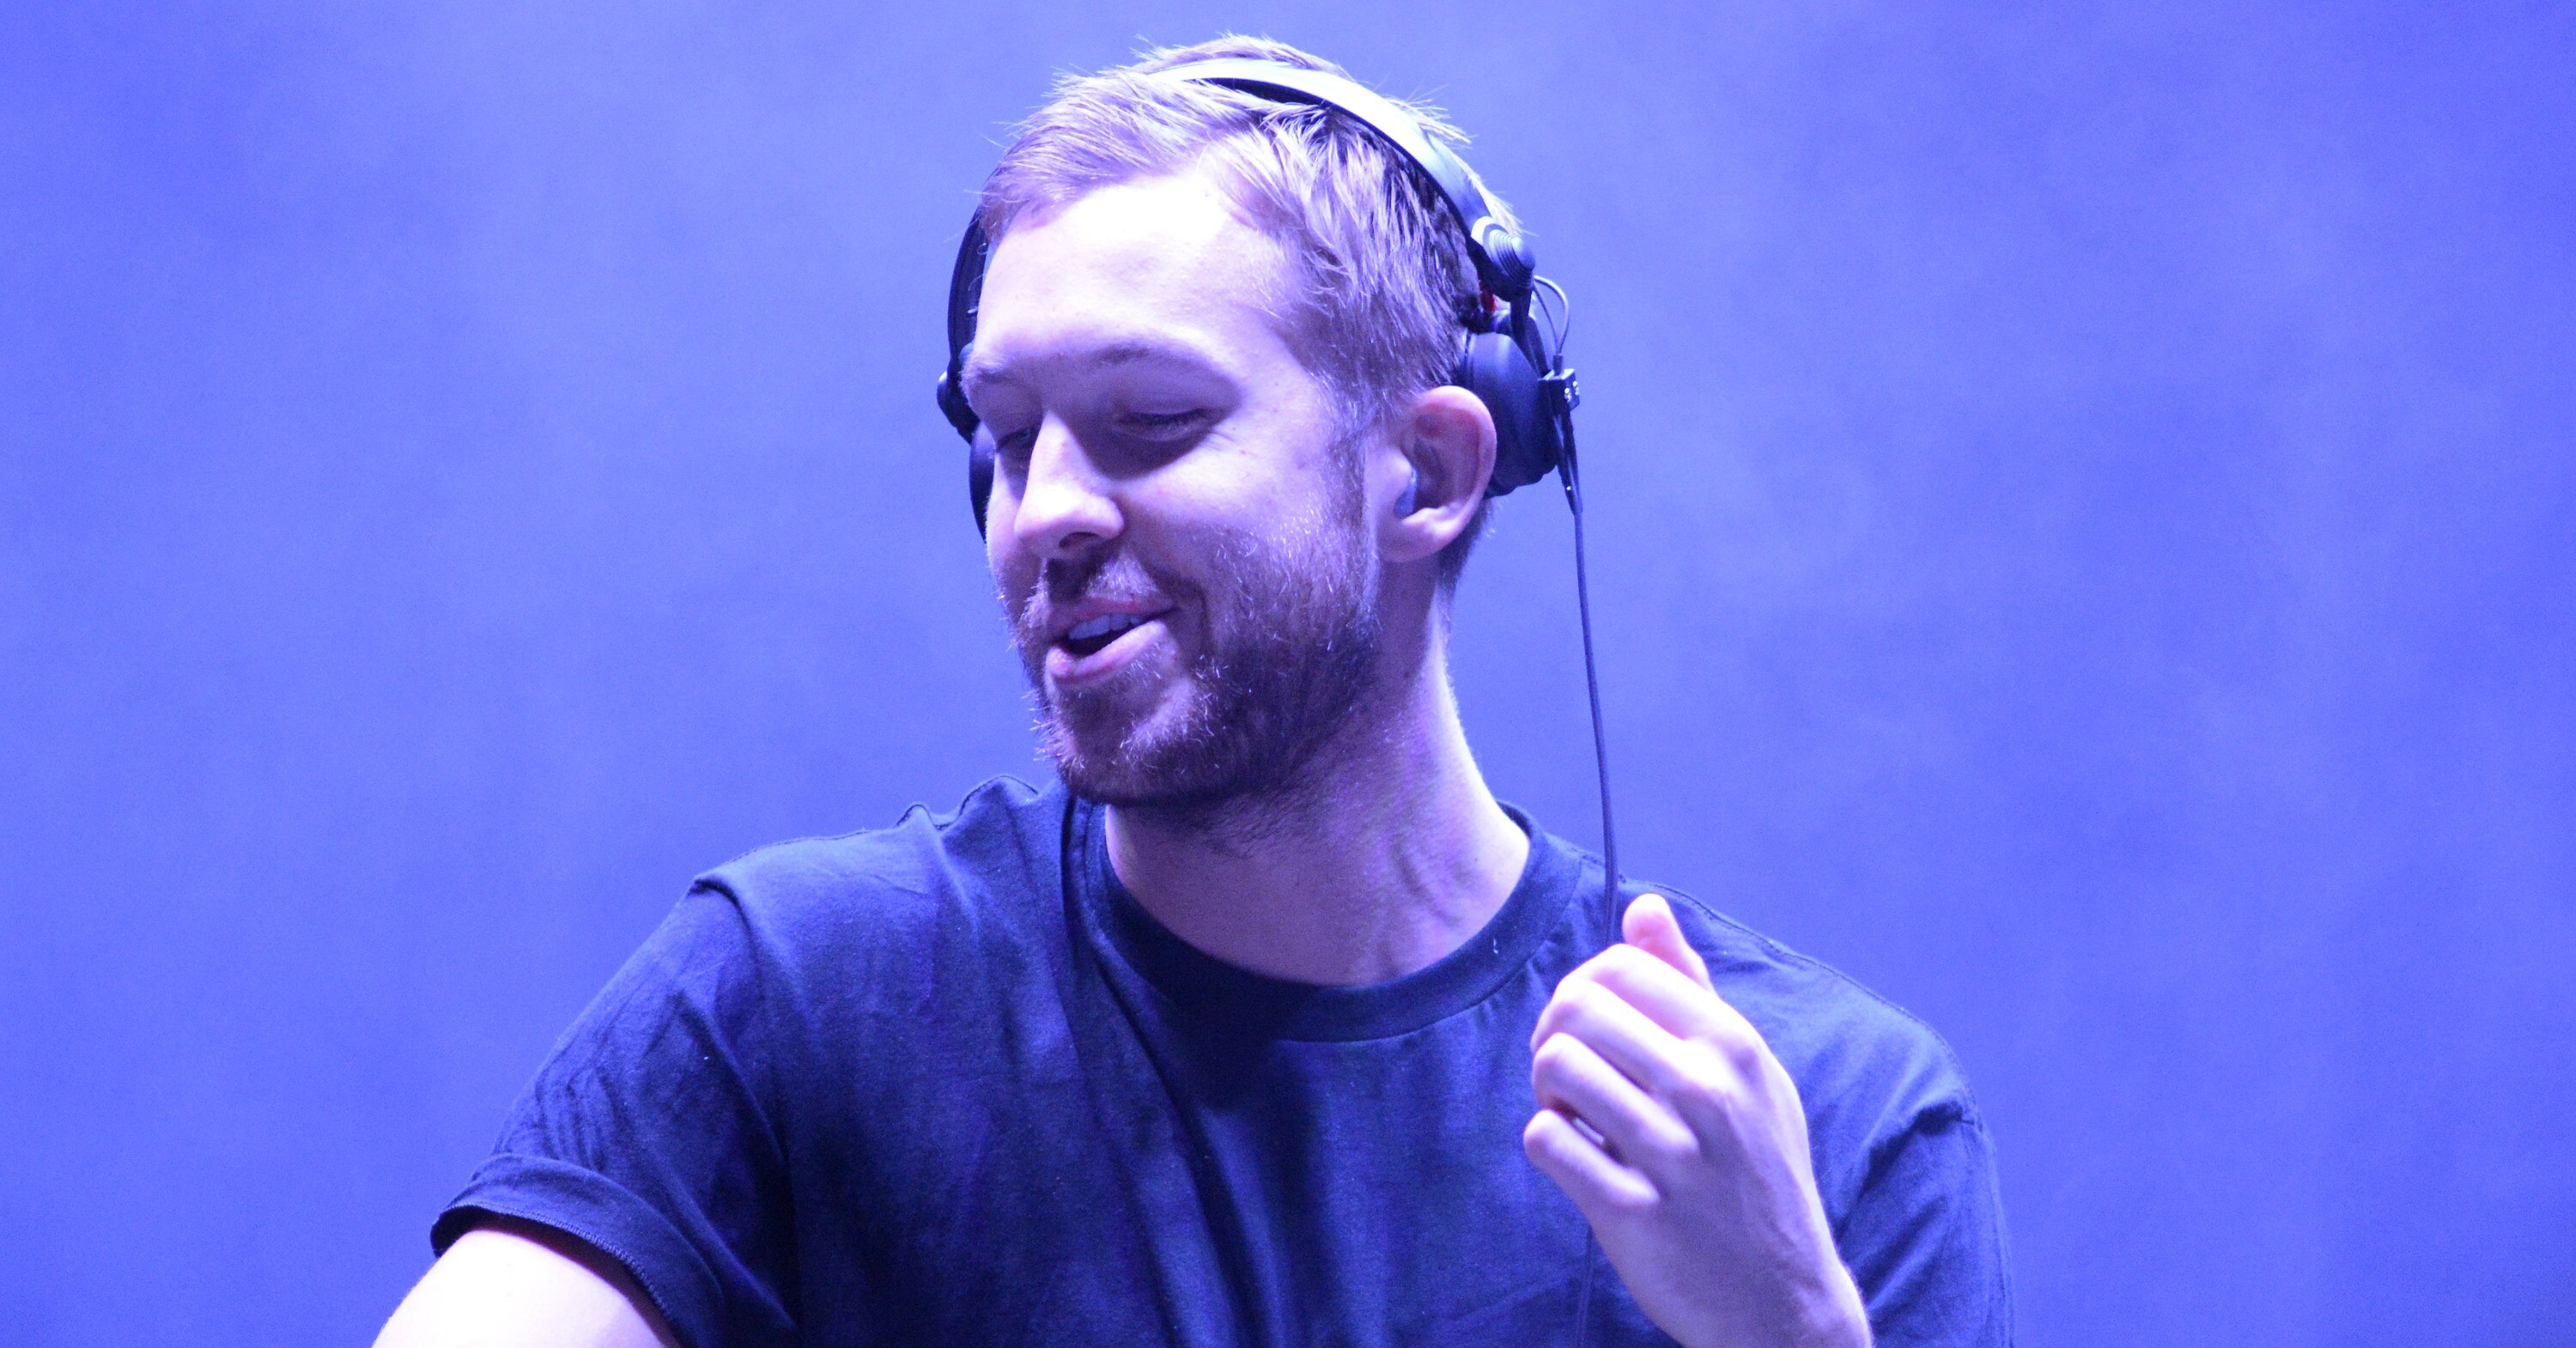 Calvin Harris, Wallpapers and images, Stunning photography, Artistic expressions, 3000x1570 HD Desktop